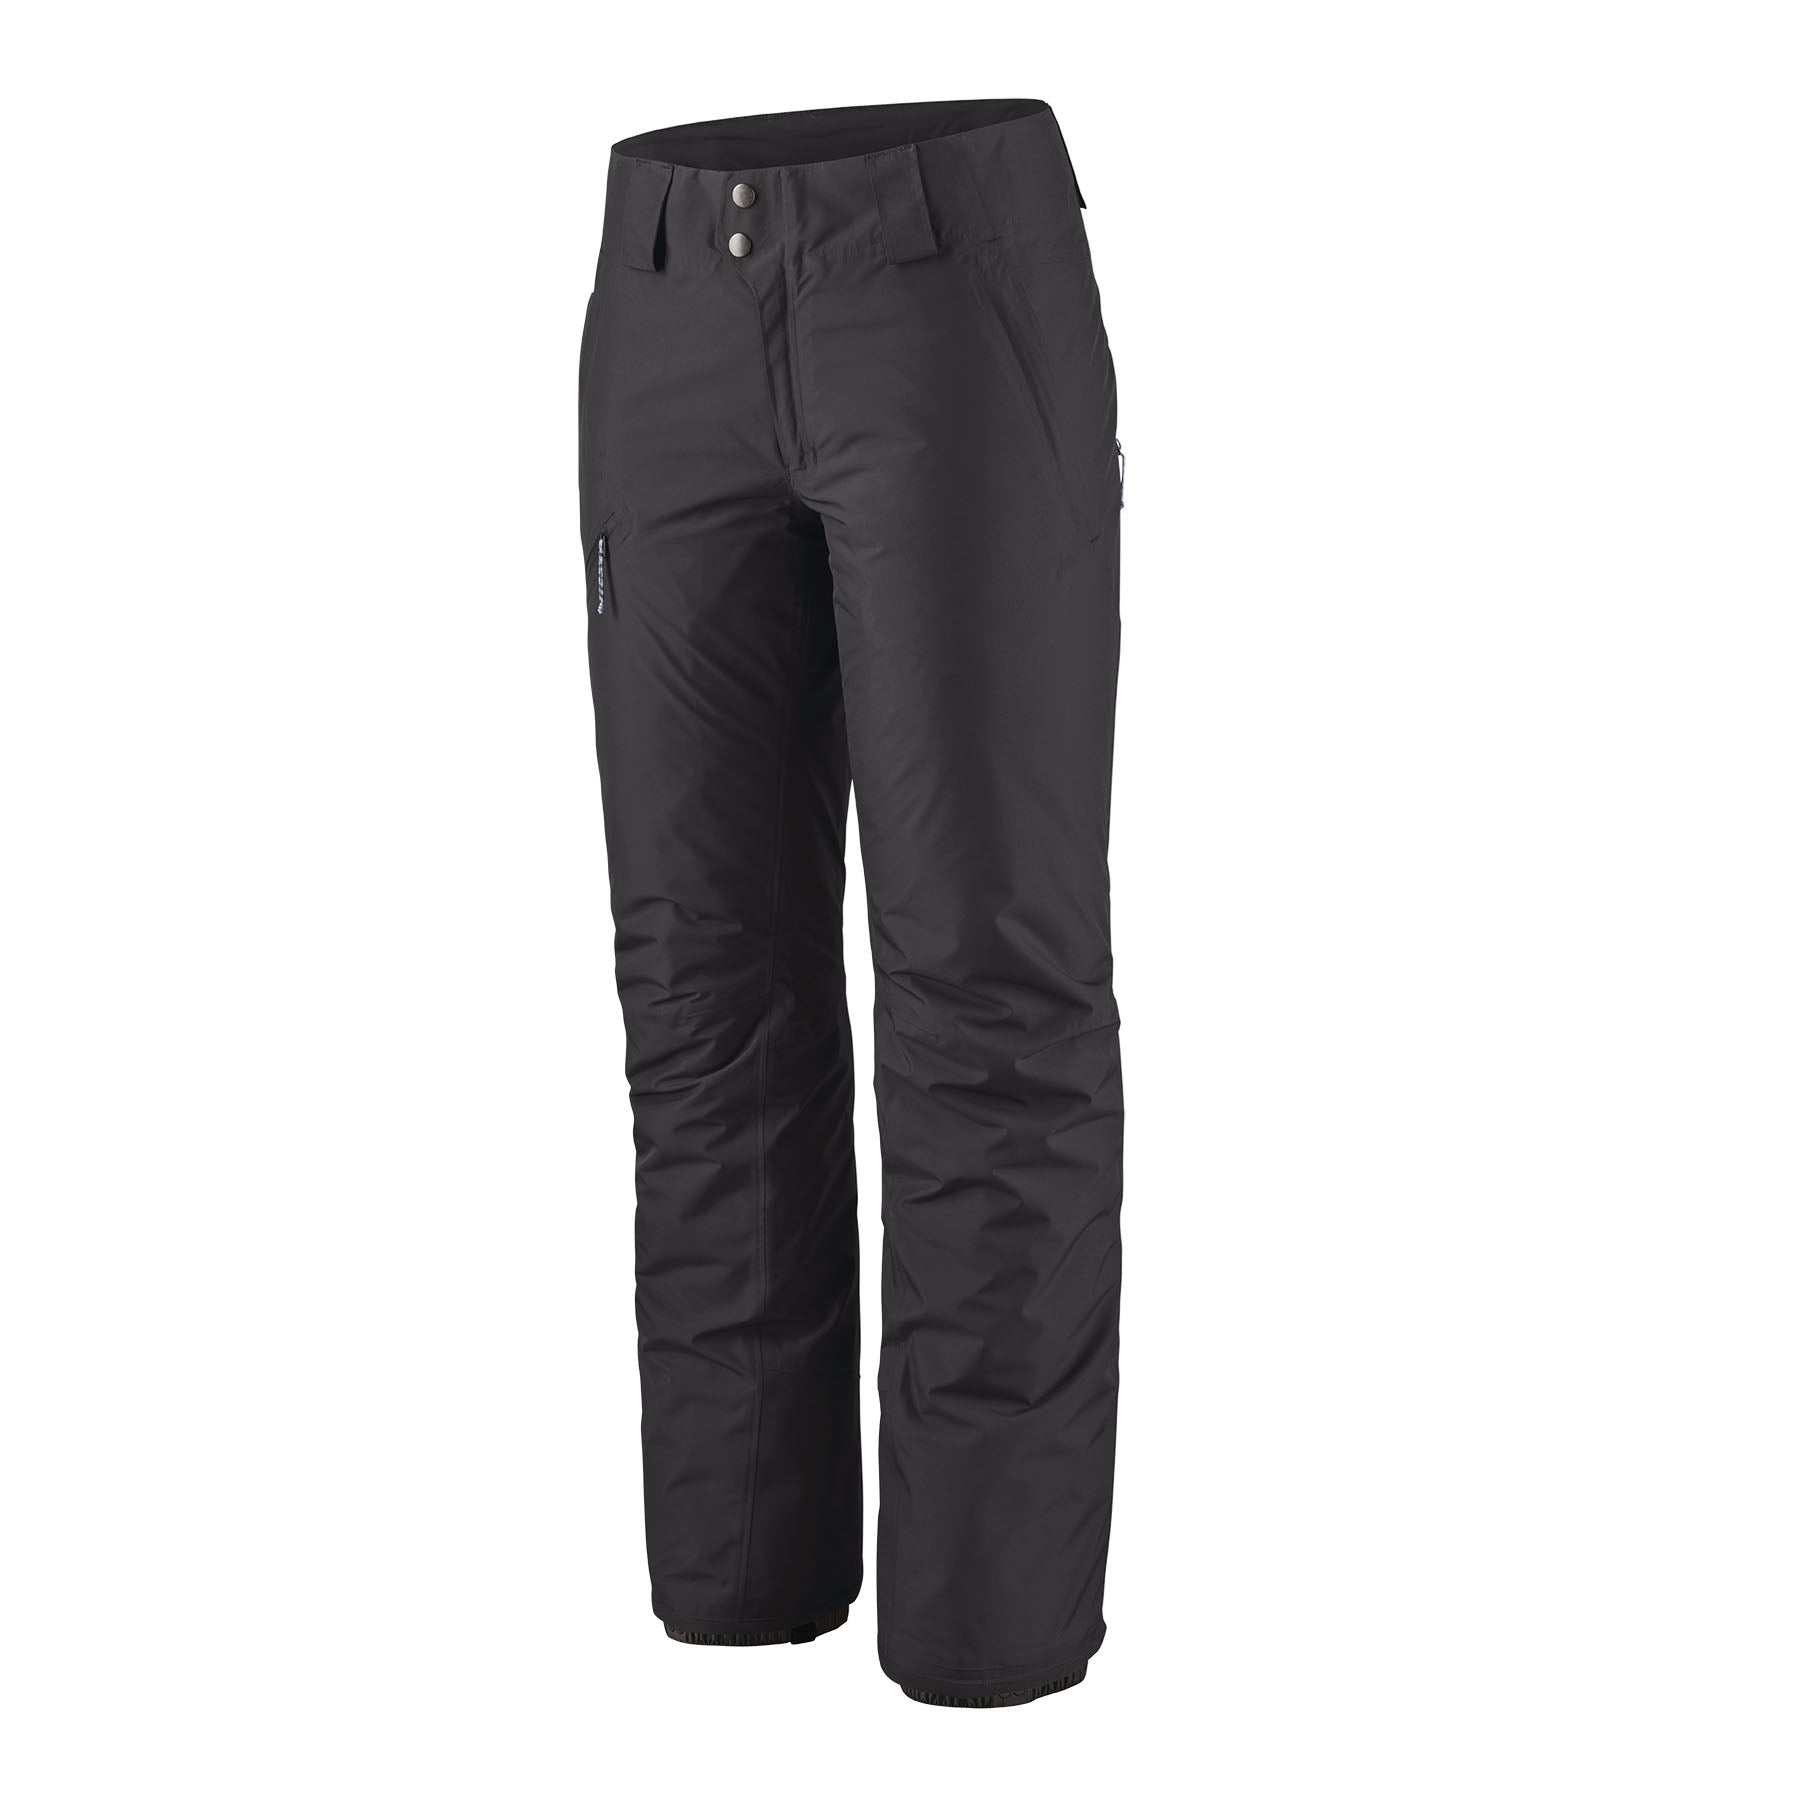 Patagonia Women's Insulated Powder Town Pants Short - Fall 2022